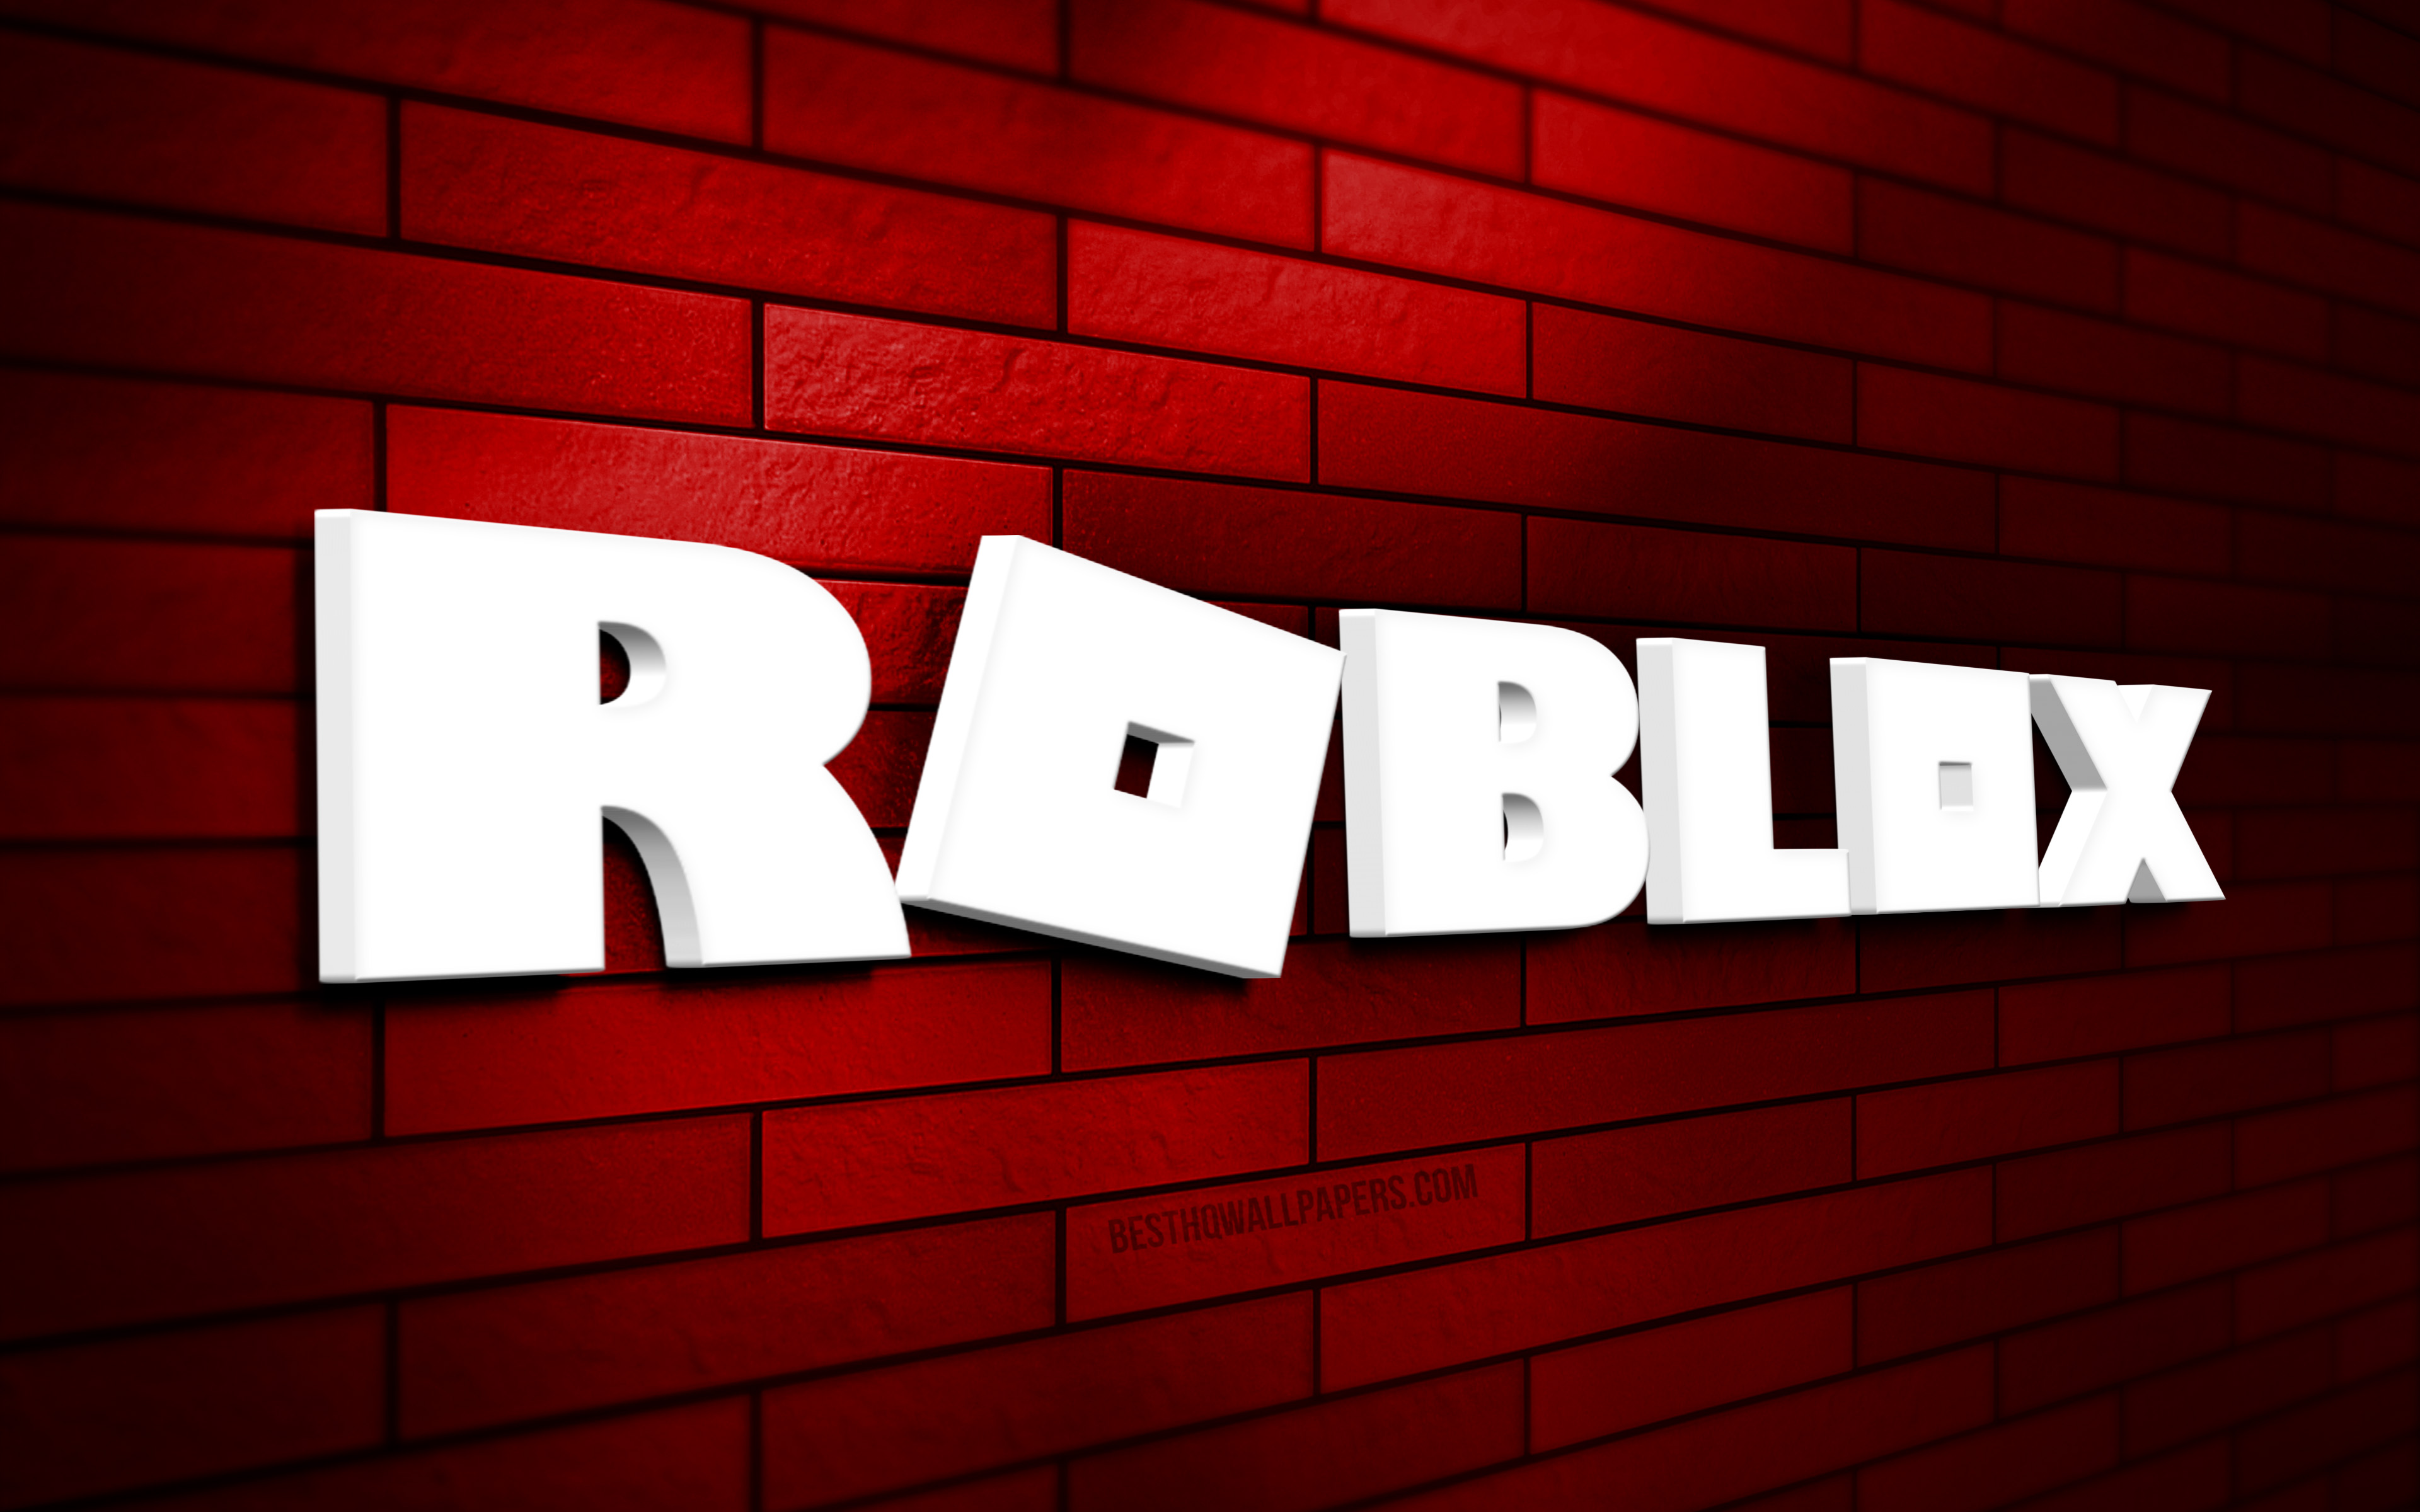 Download wallpapers Roblox 3D logo, 4K, red brickwall, creative, online  games, Roblox logo, 3D art, Roblox for desktop with resolution 3840x2400.  High Quality HD pictures wallpapers